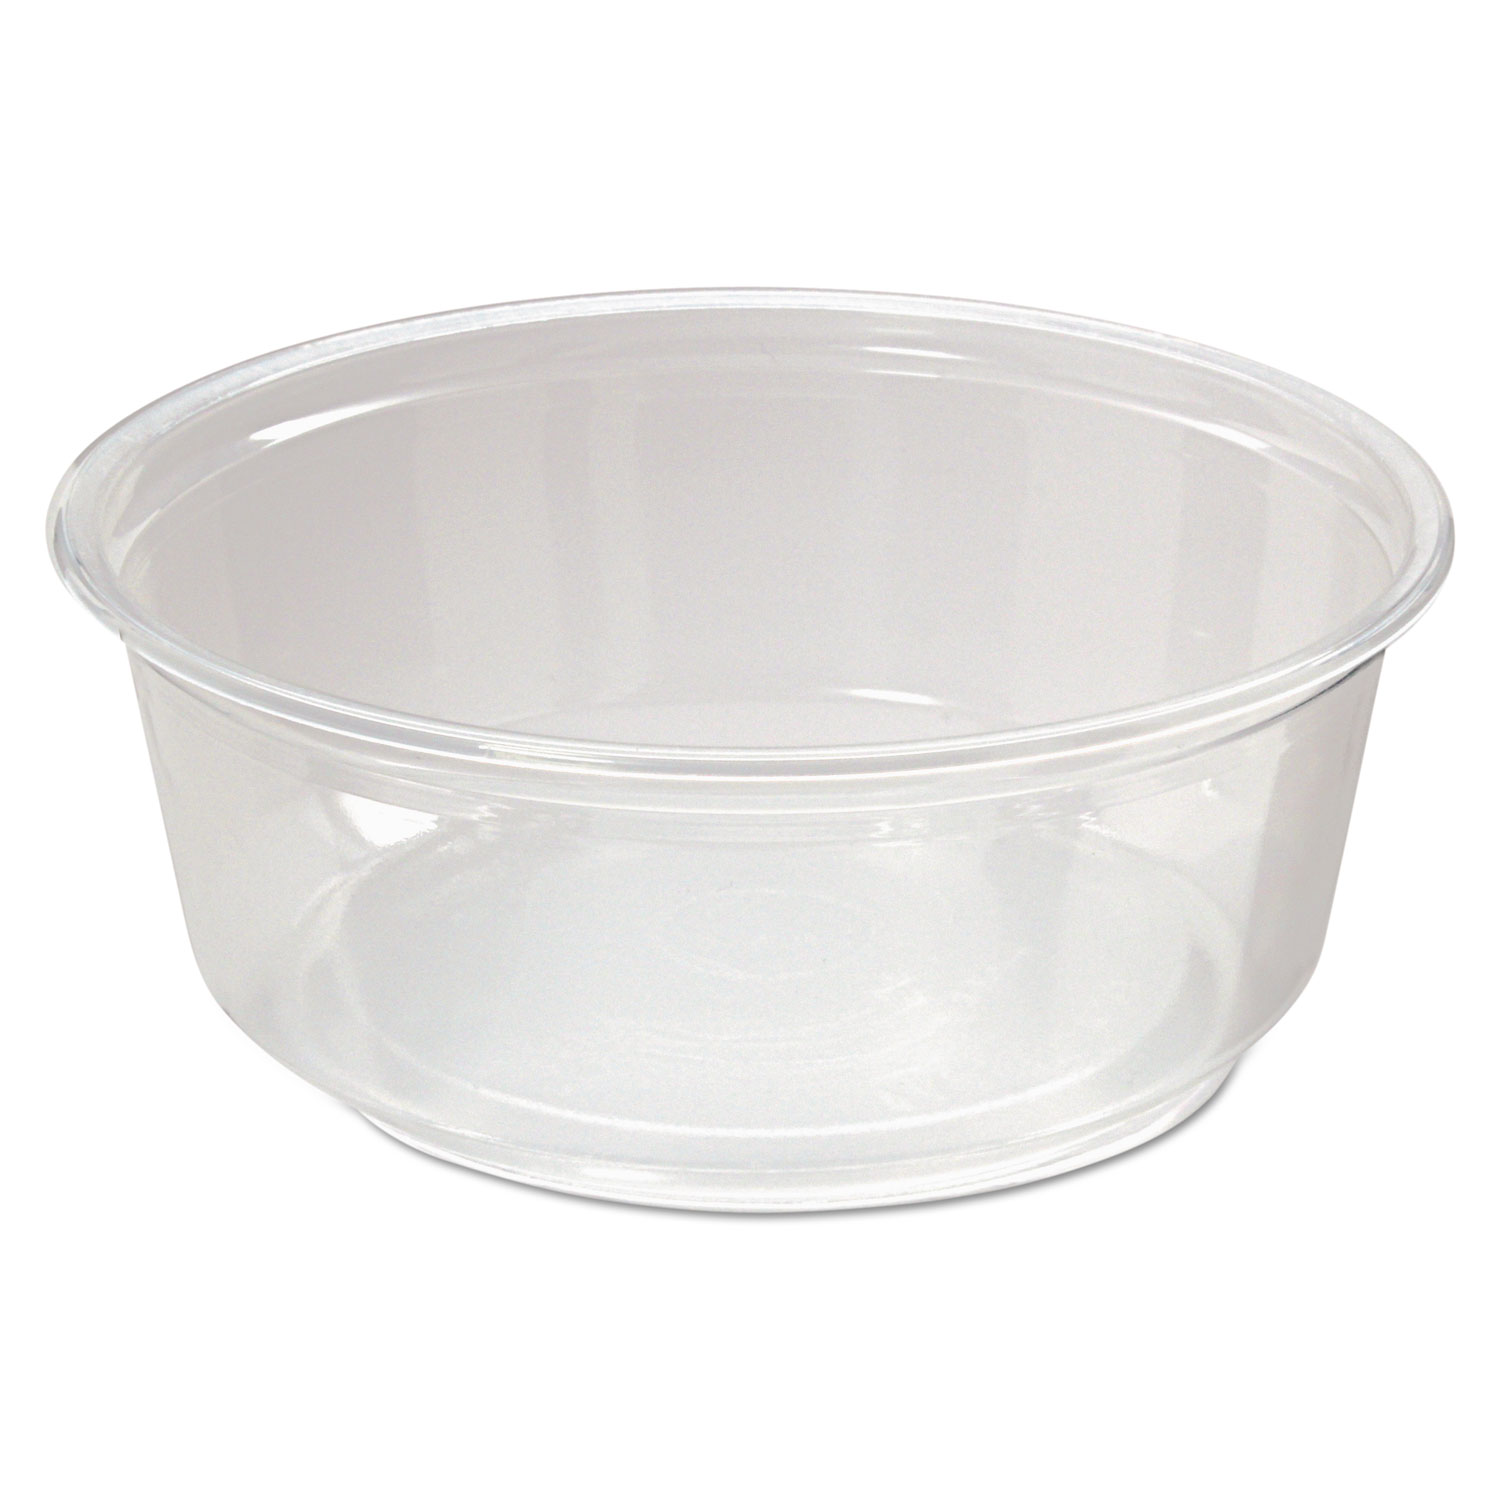 Fabrikal 9505083 2 oz Portion Cup Clear Plastic Lid